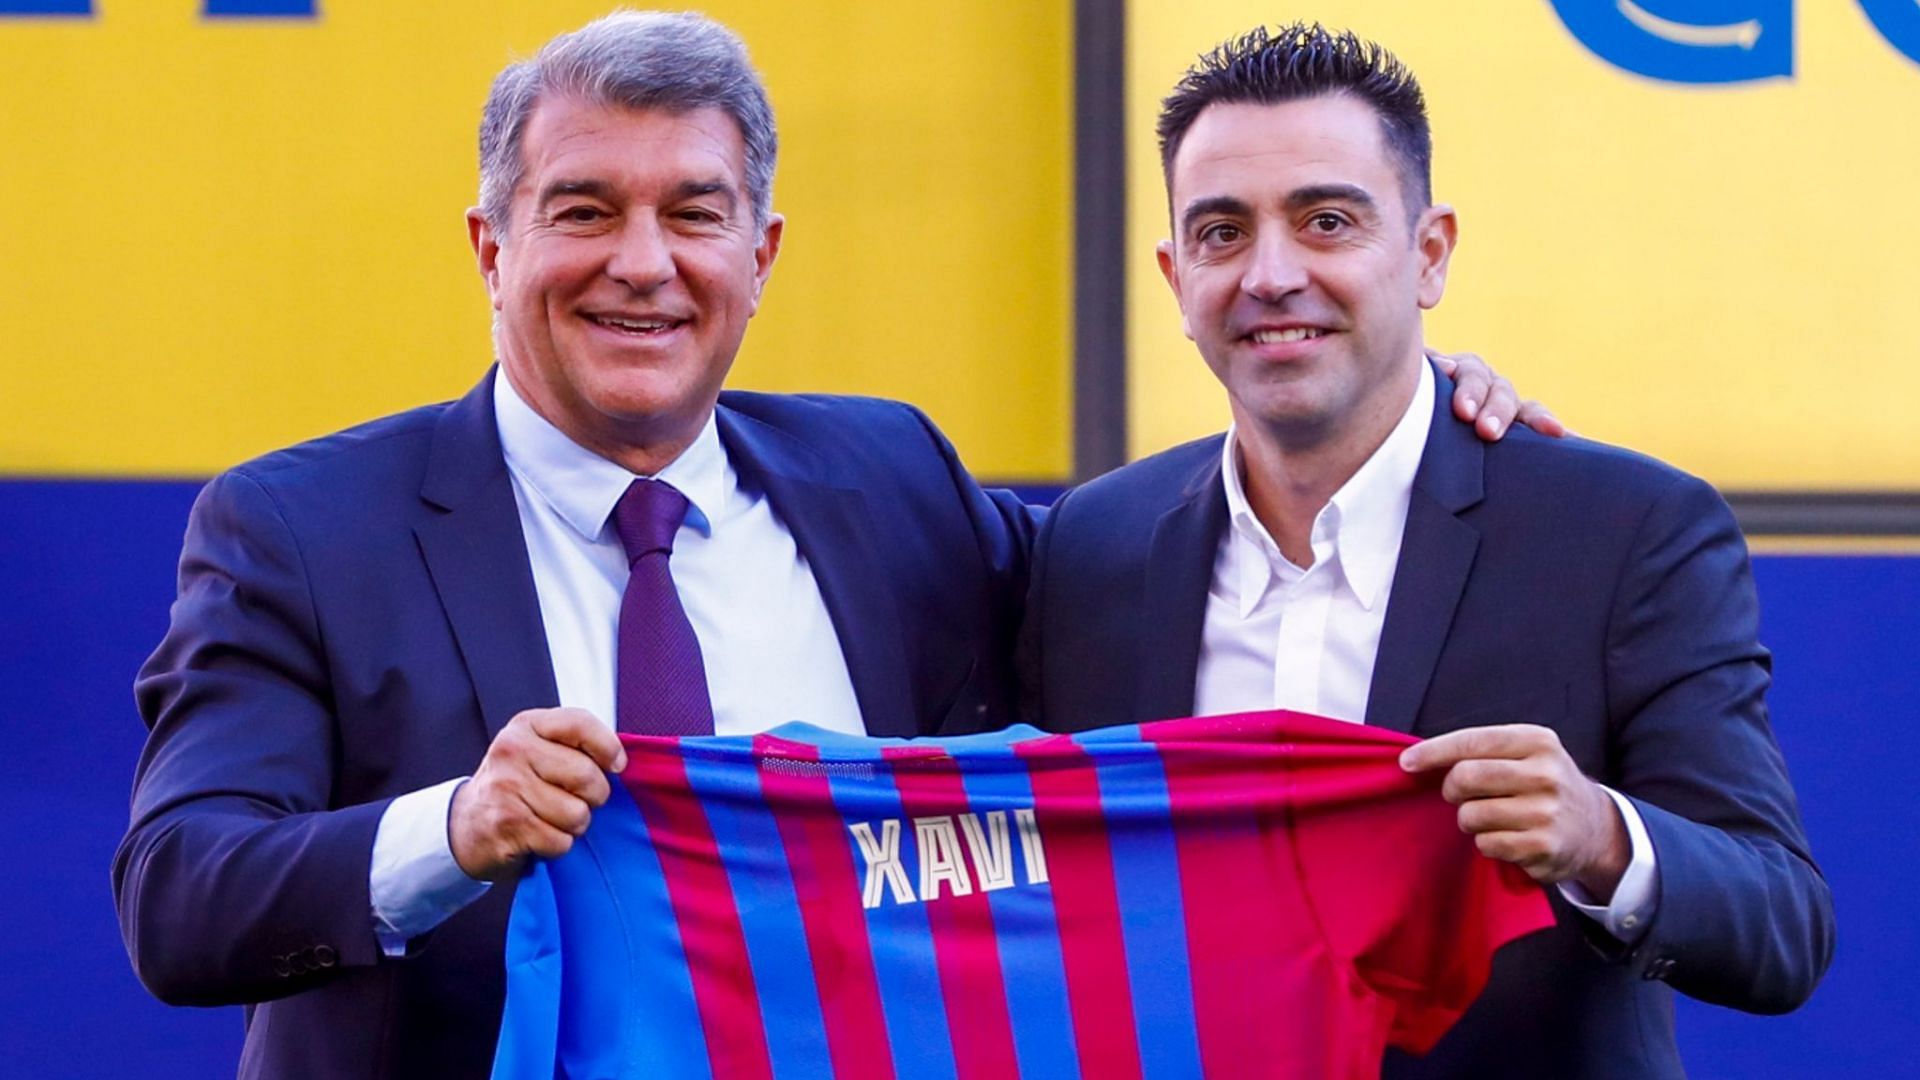 Xavi Hernandez is one of the few players to have played for and managed Barcelona.